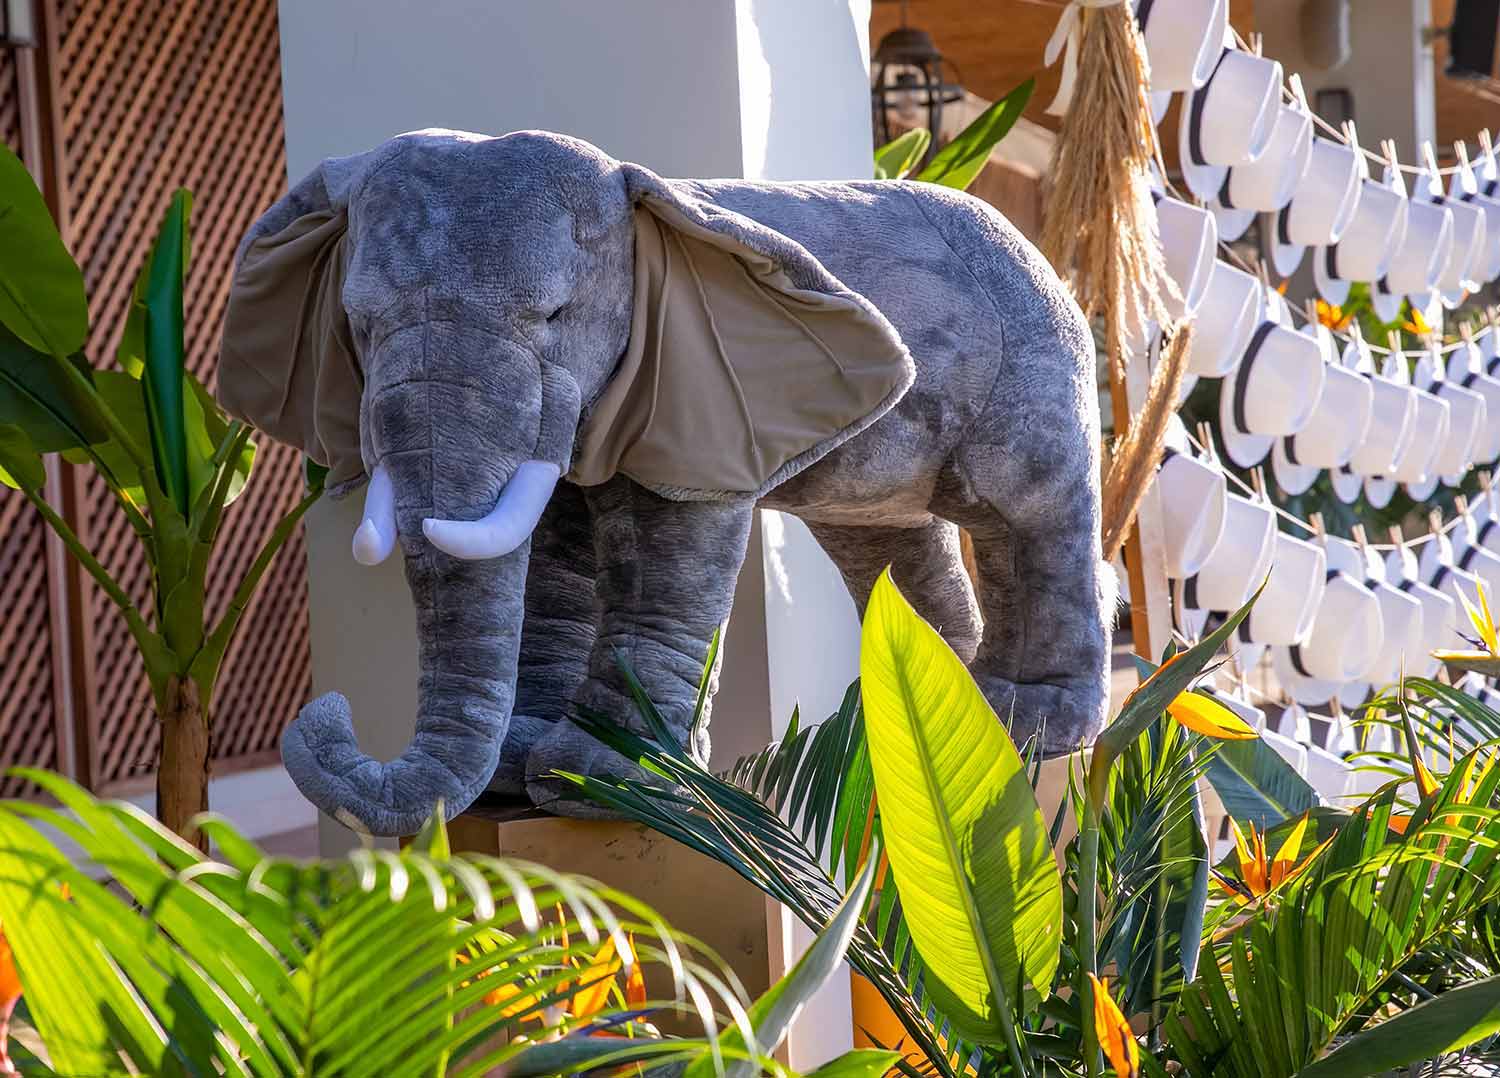 Safari themed Christening with a Baby Elephant at the entrance